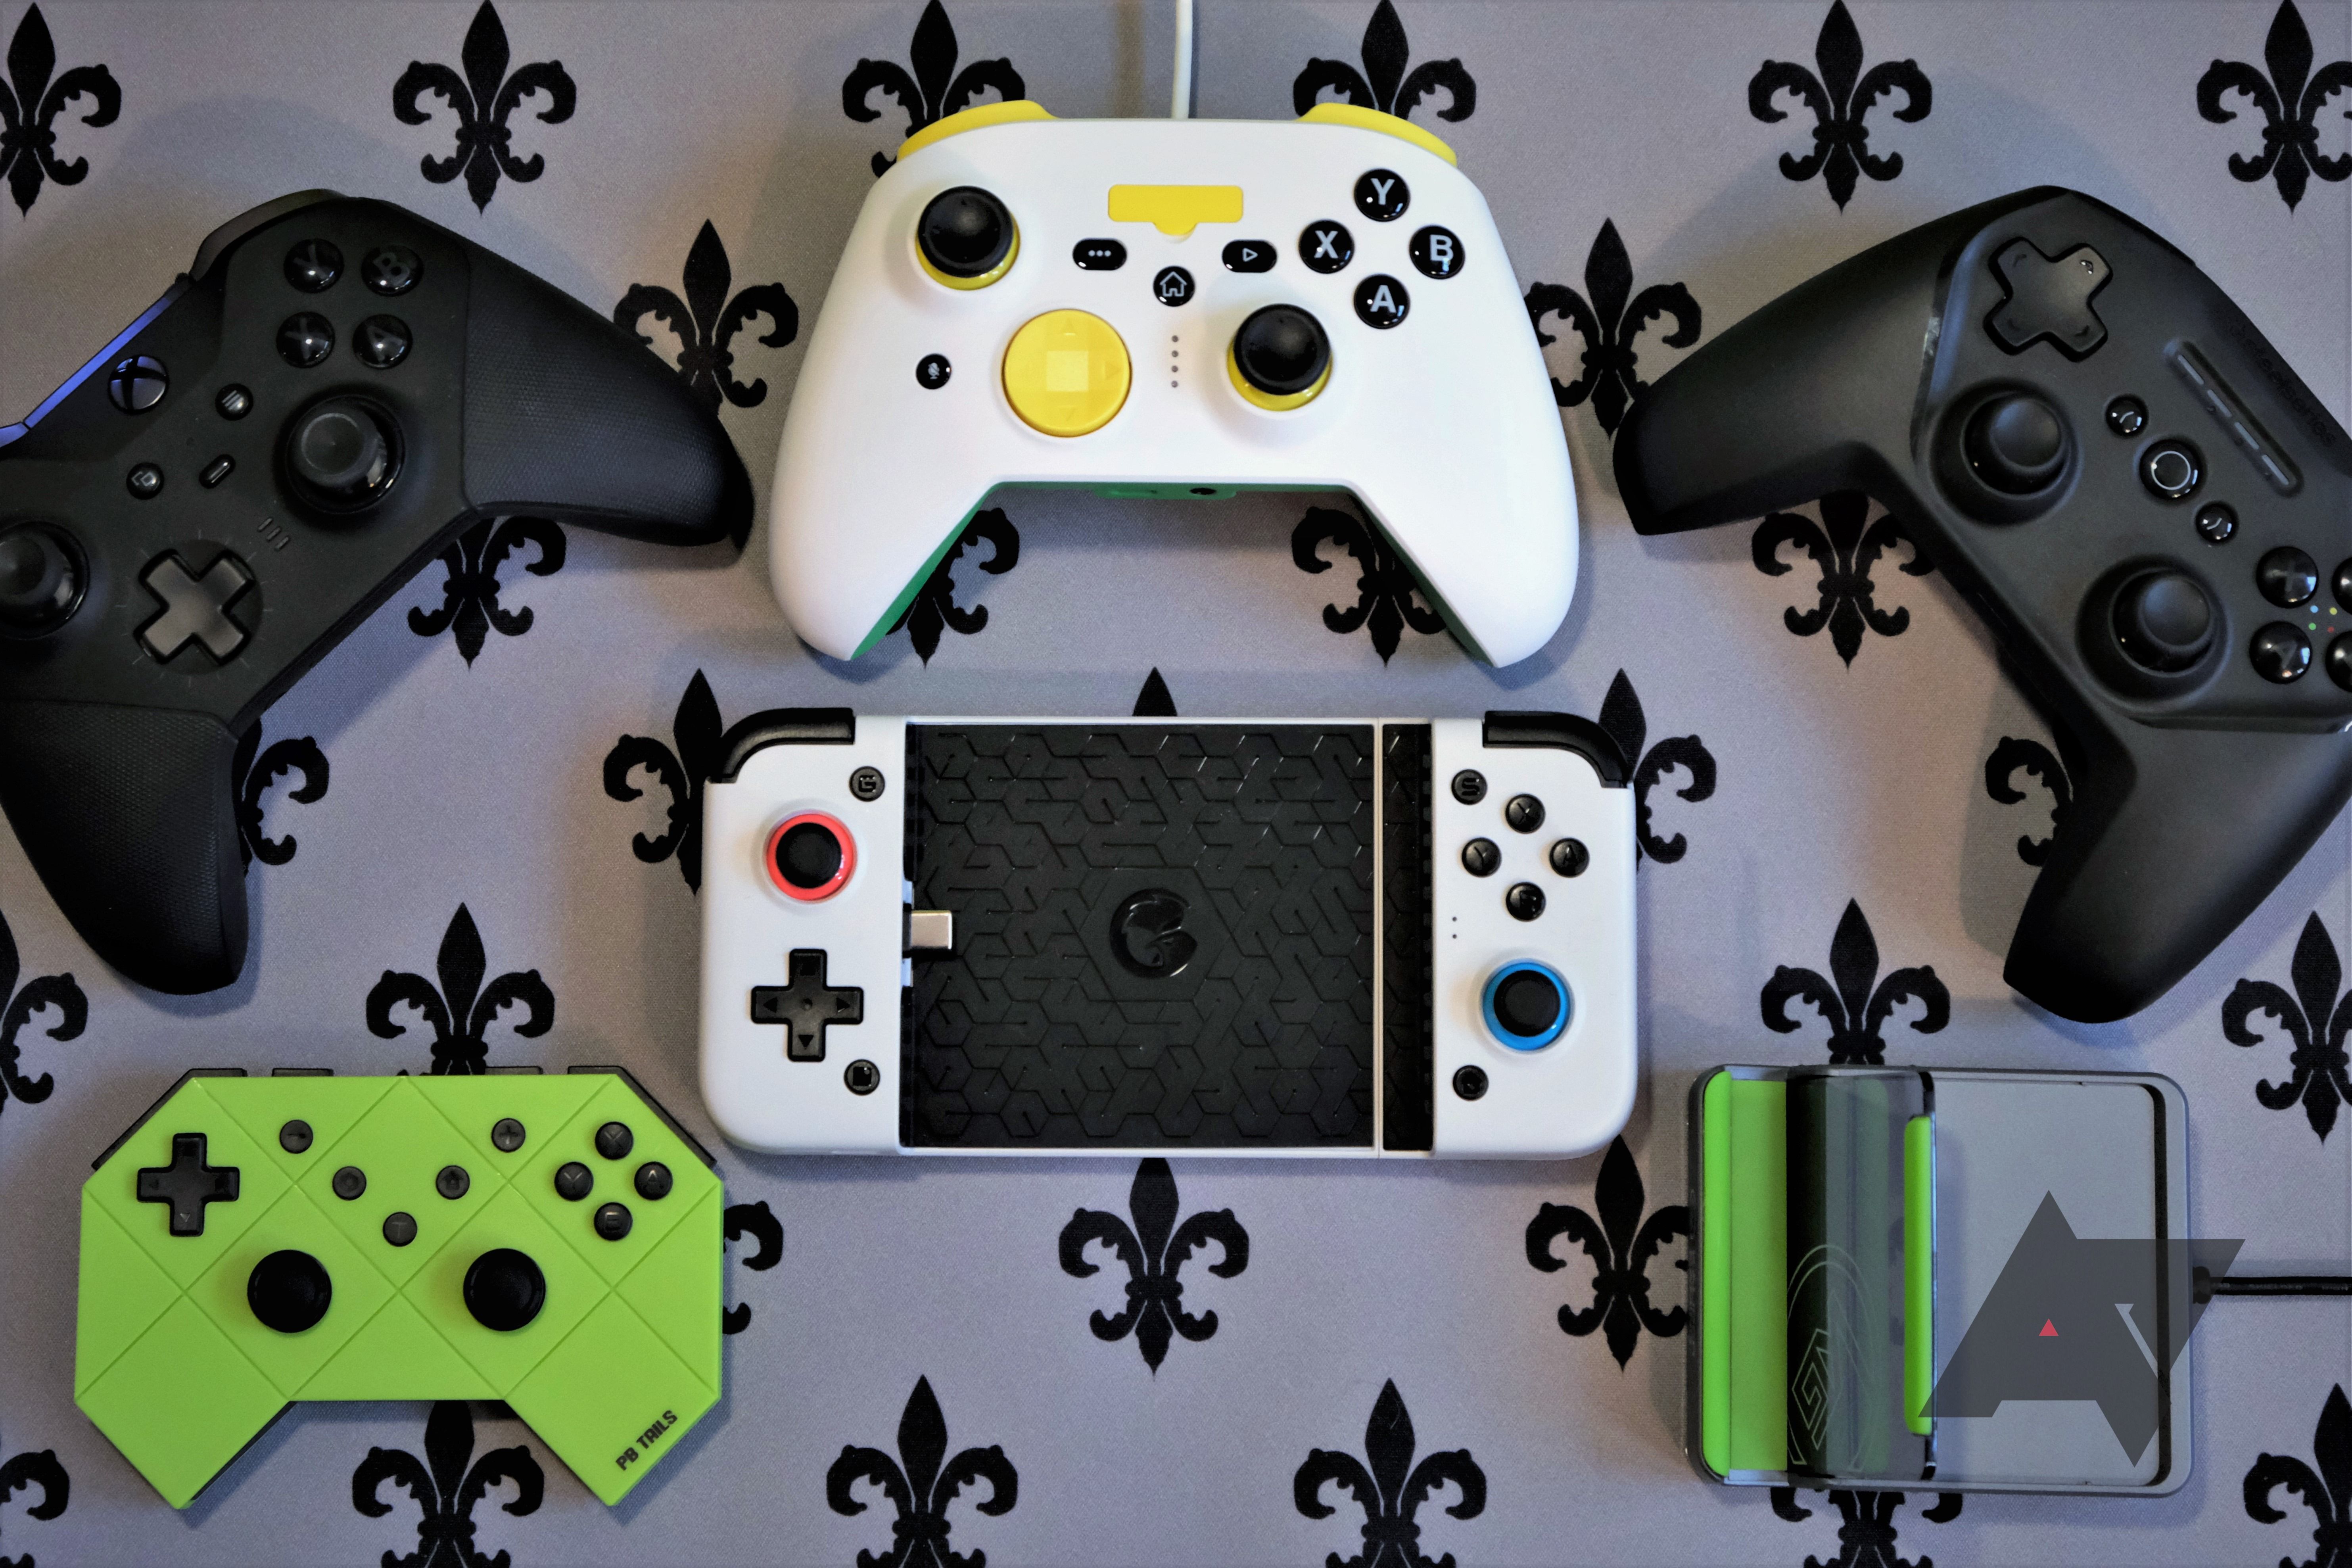 The best mobile gaming accessories, controllers and cases